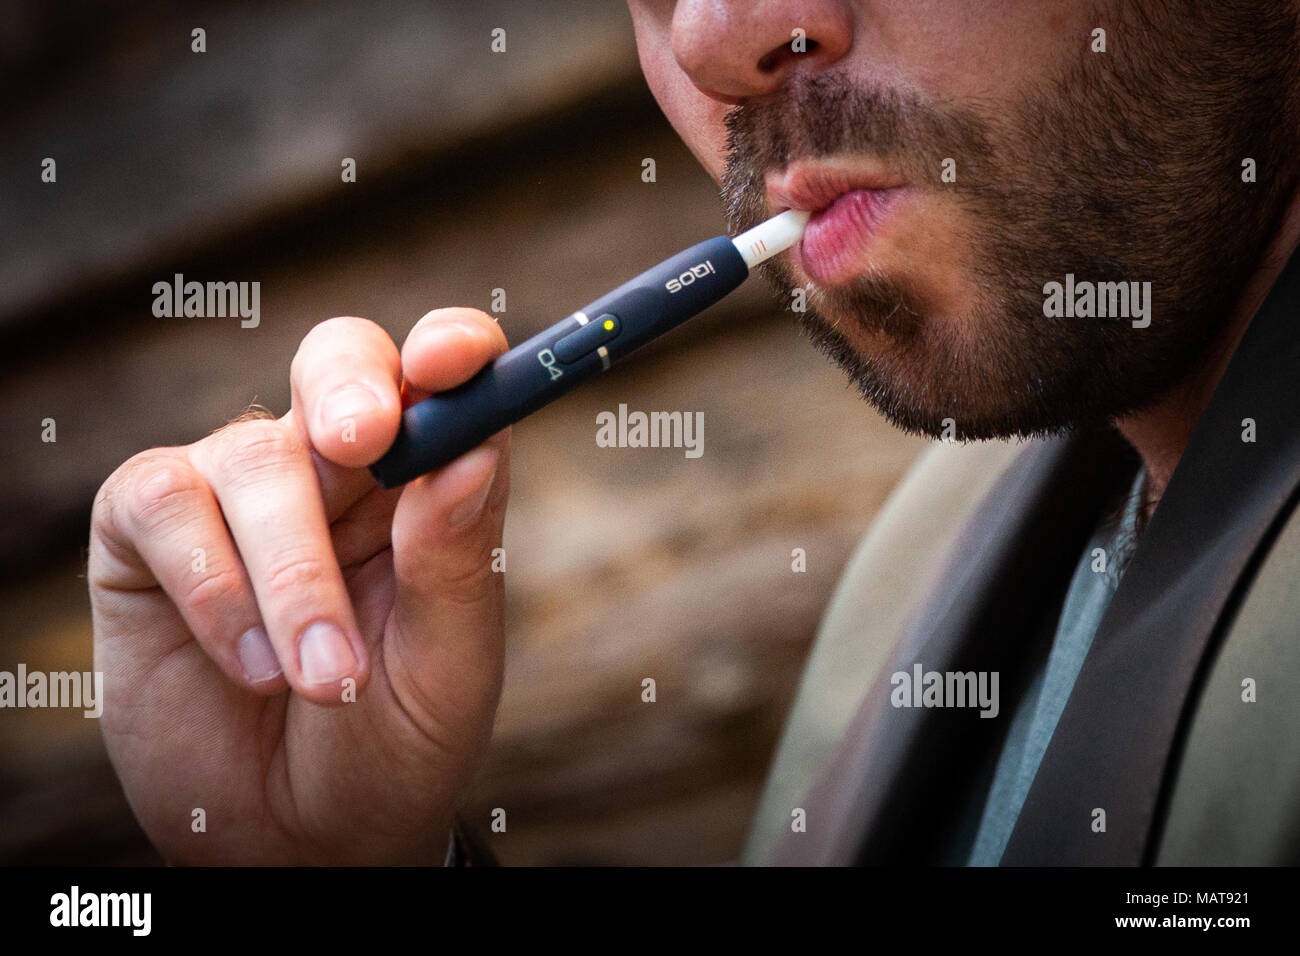 Berlin, Germany. 27th Mar, 2018. The e-cigarette "IQOS" of the company  "Philip Morris International" on